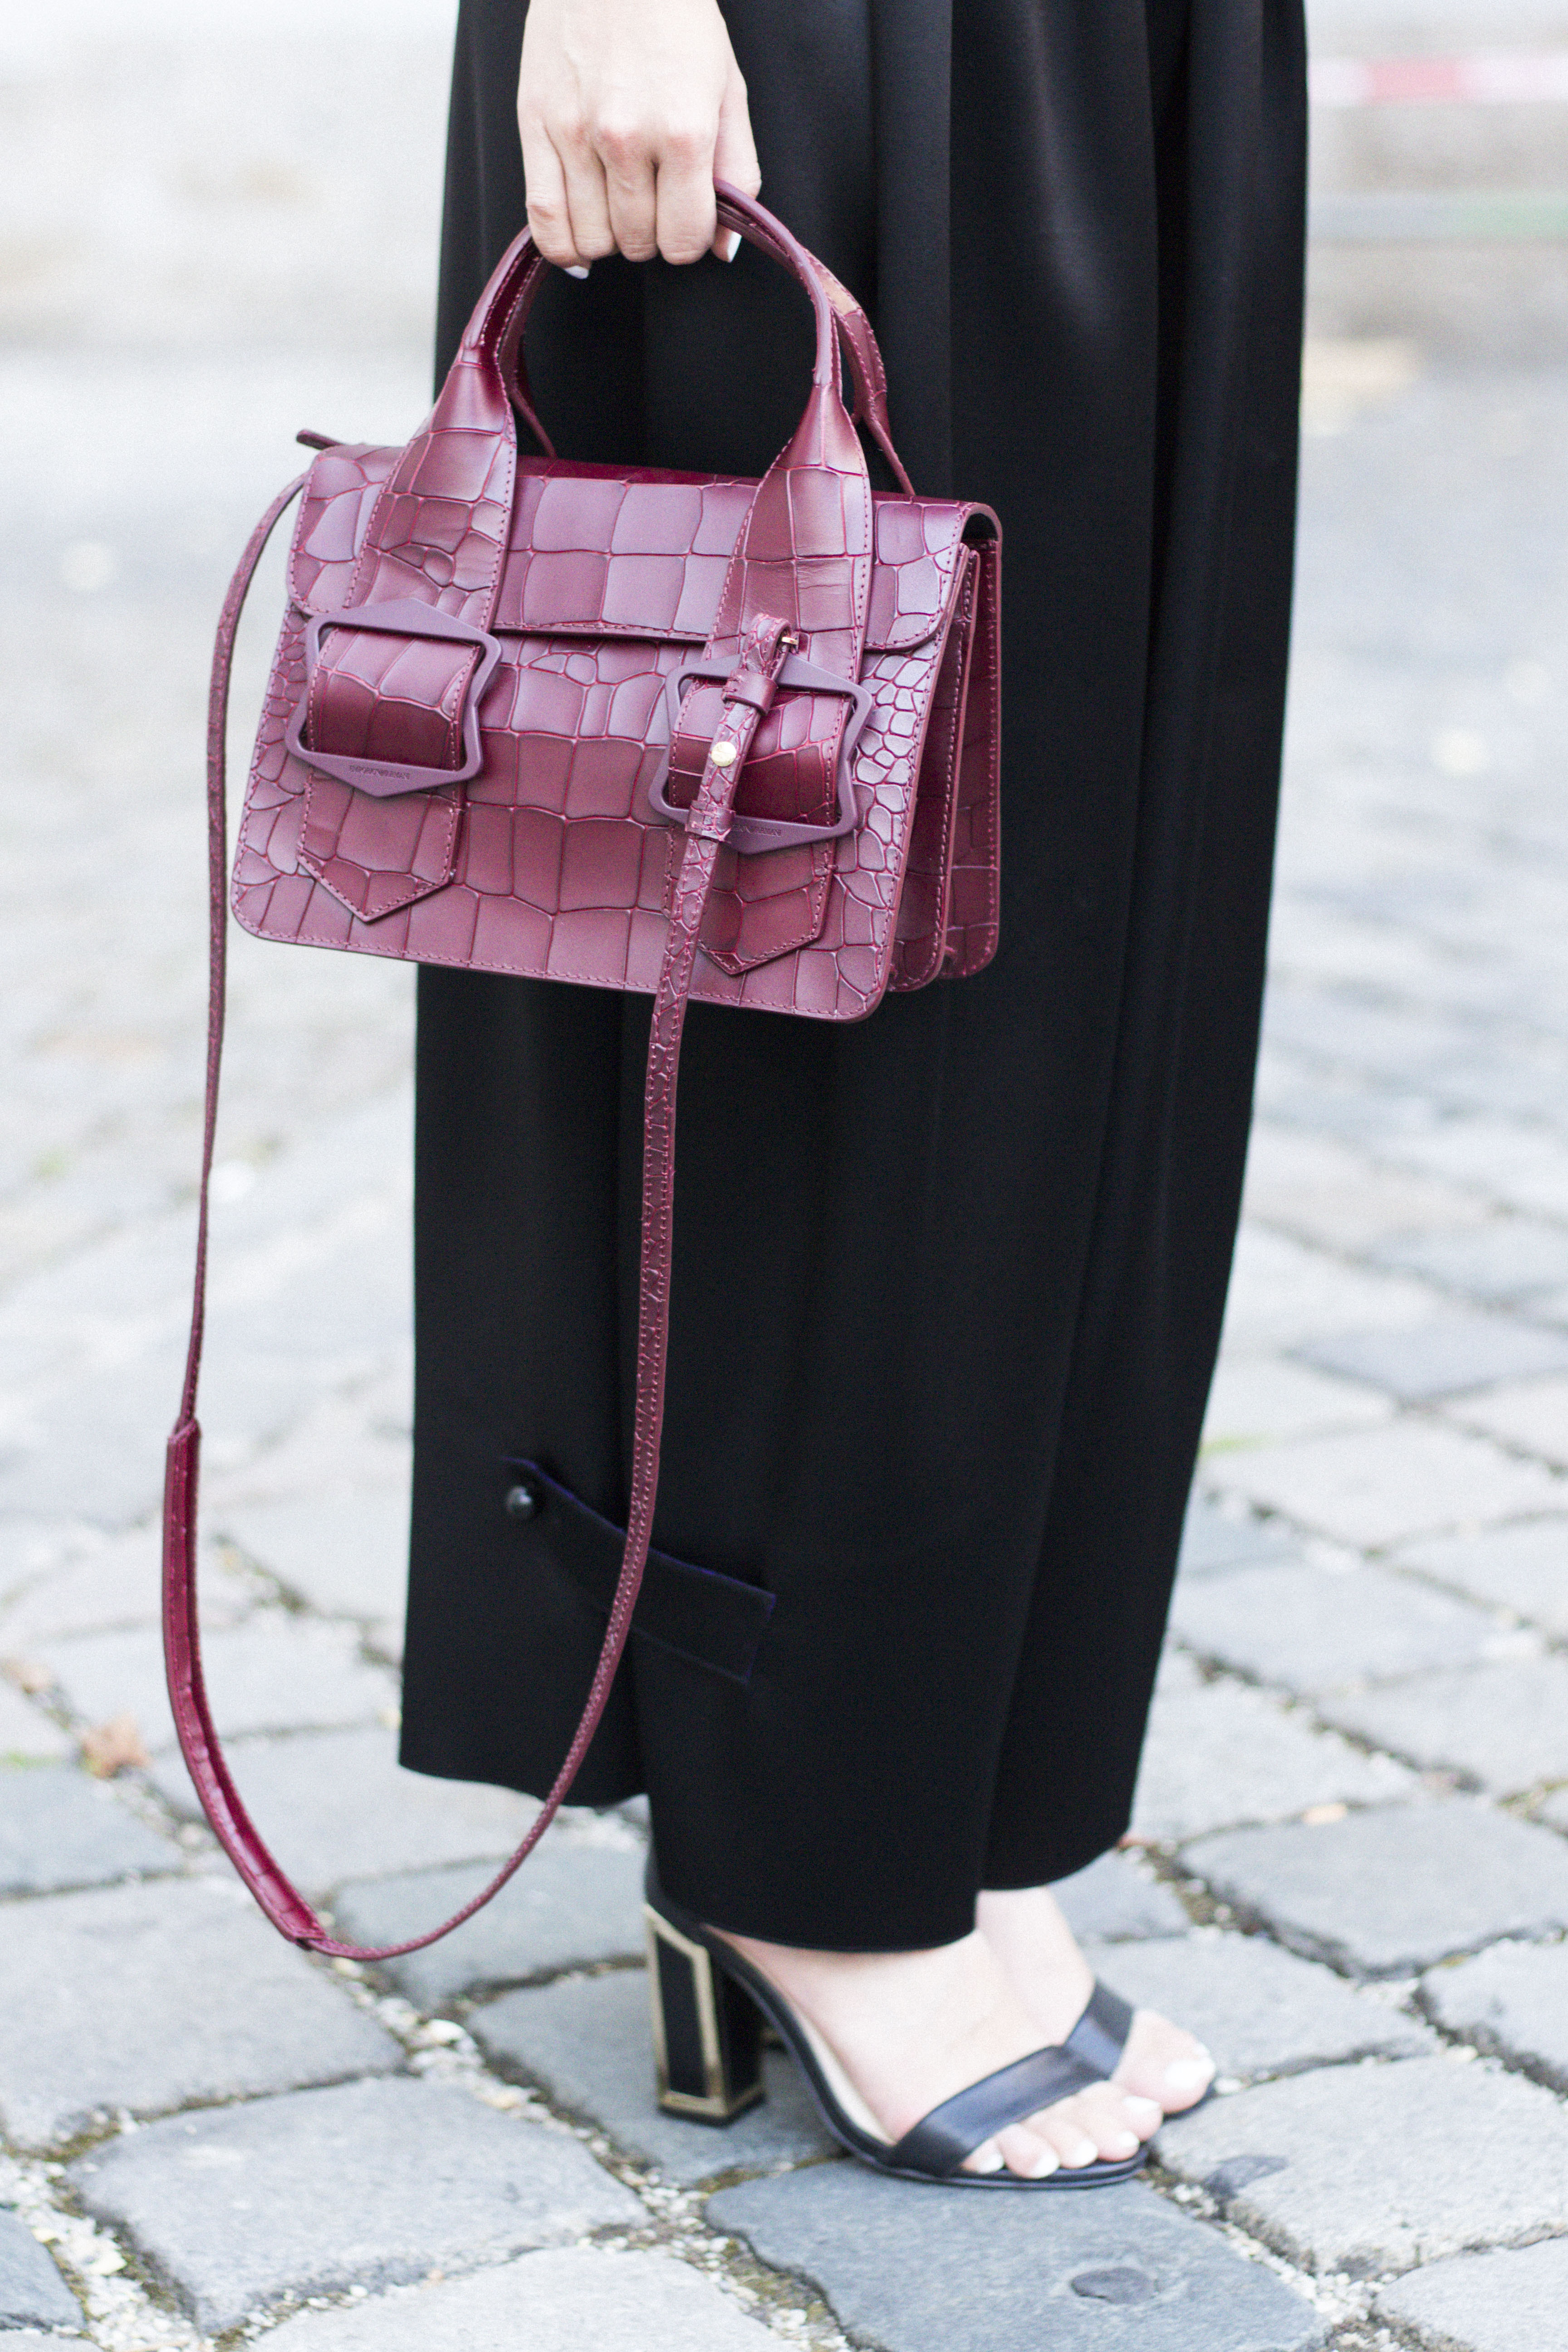 I heart Alice – Fashionblog from Germany: Alice M. Huynh wearing Emporio Armani Wide Satin Pants & Croco Stamped Leatherbag